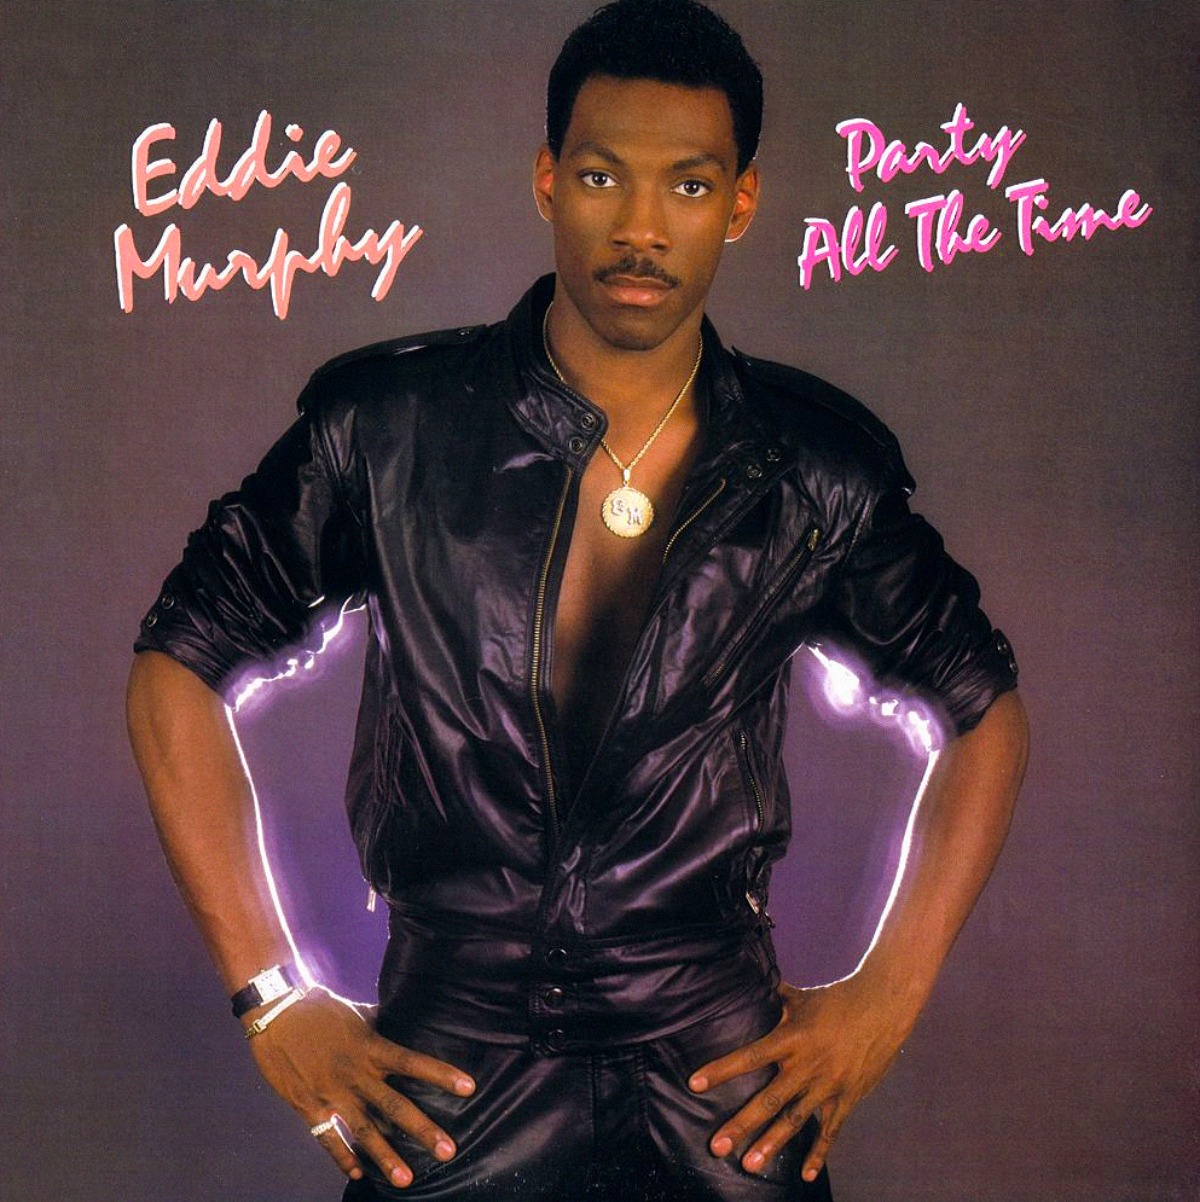 The cover of Eddie Murphy's single "Party All the Time."